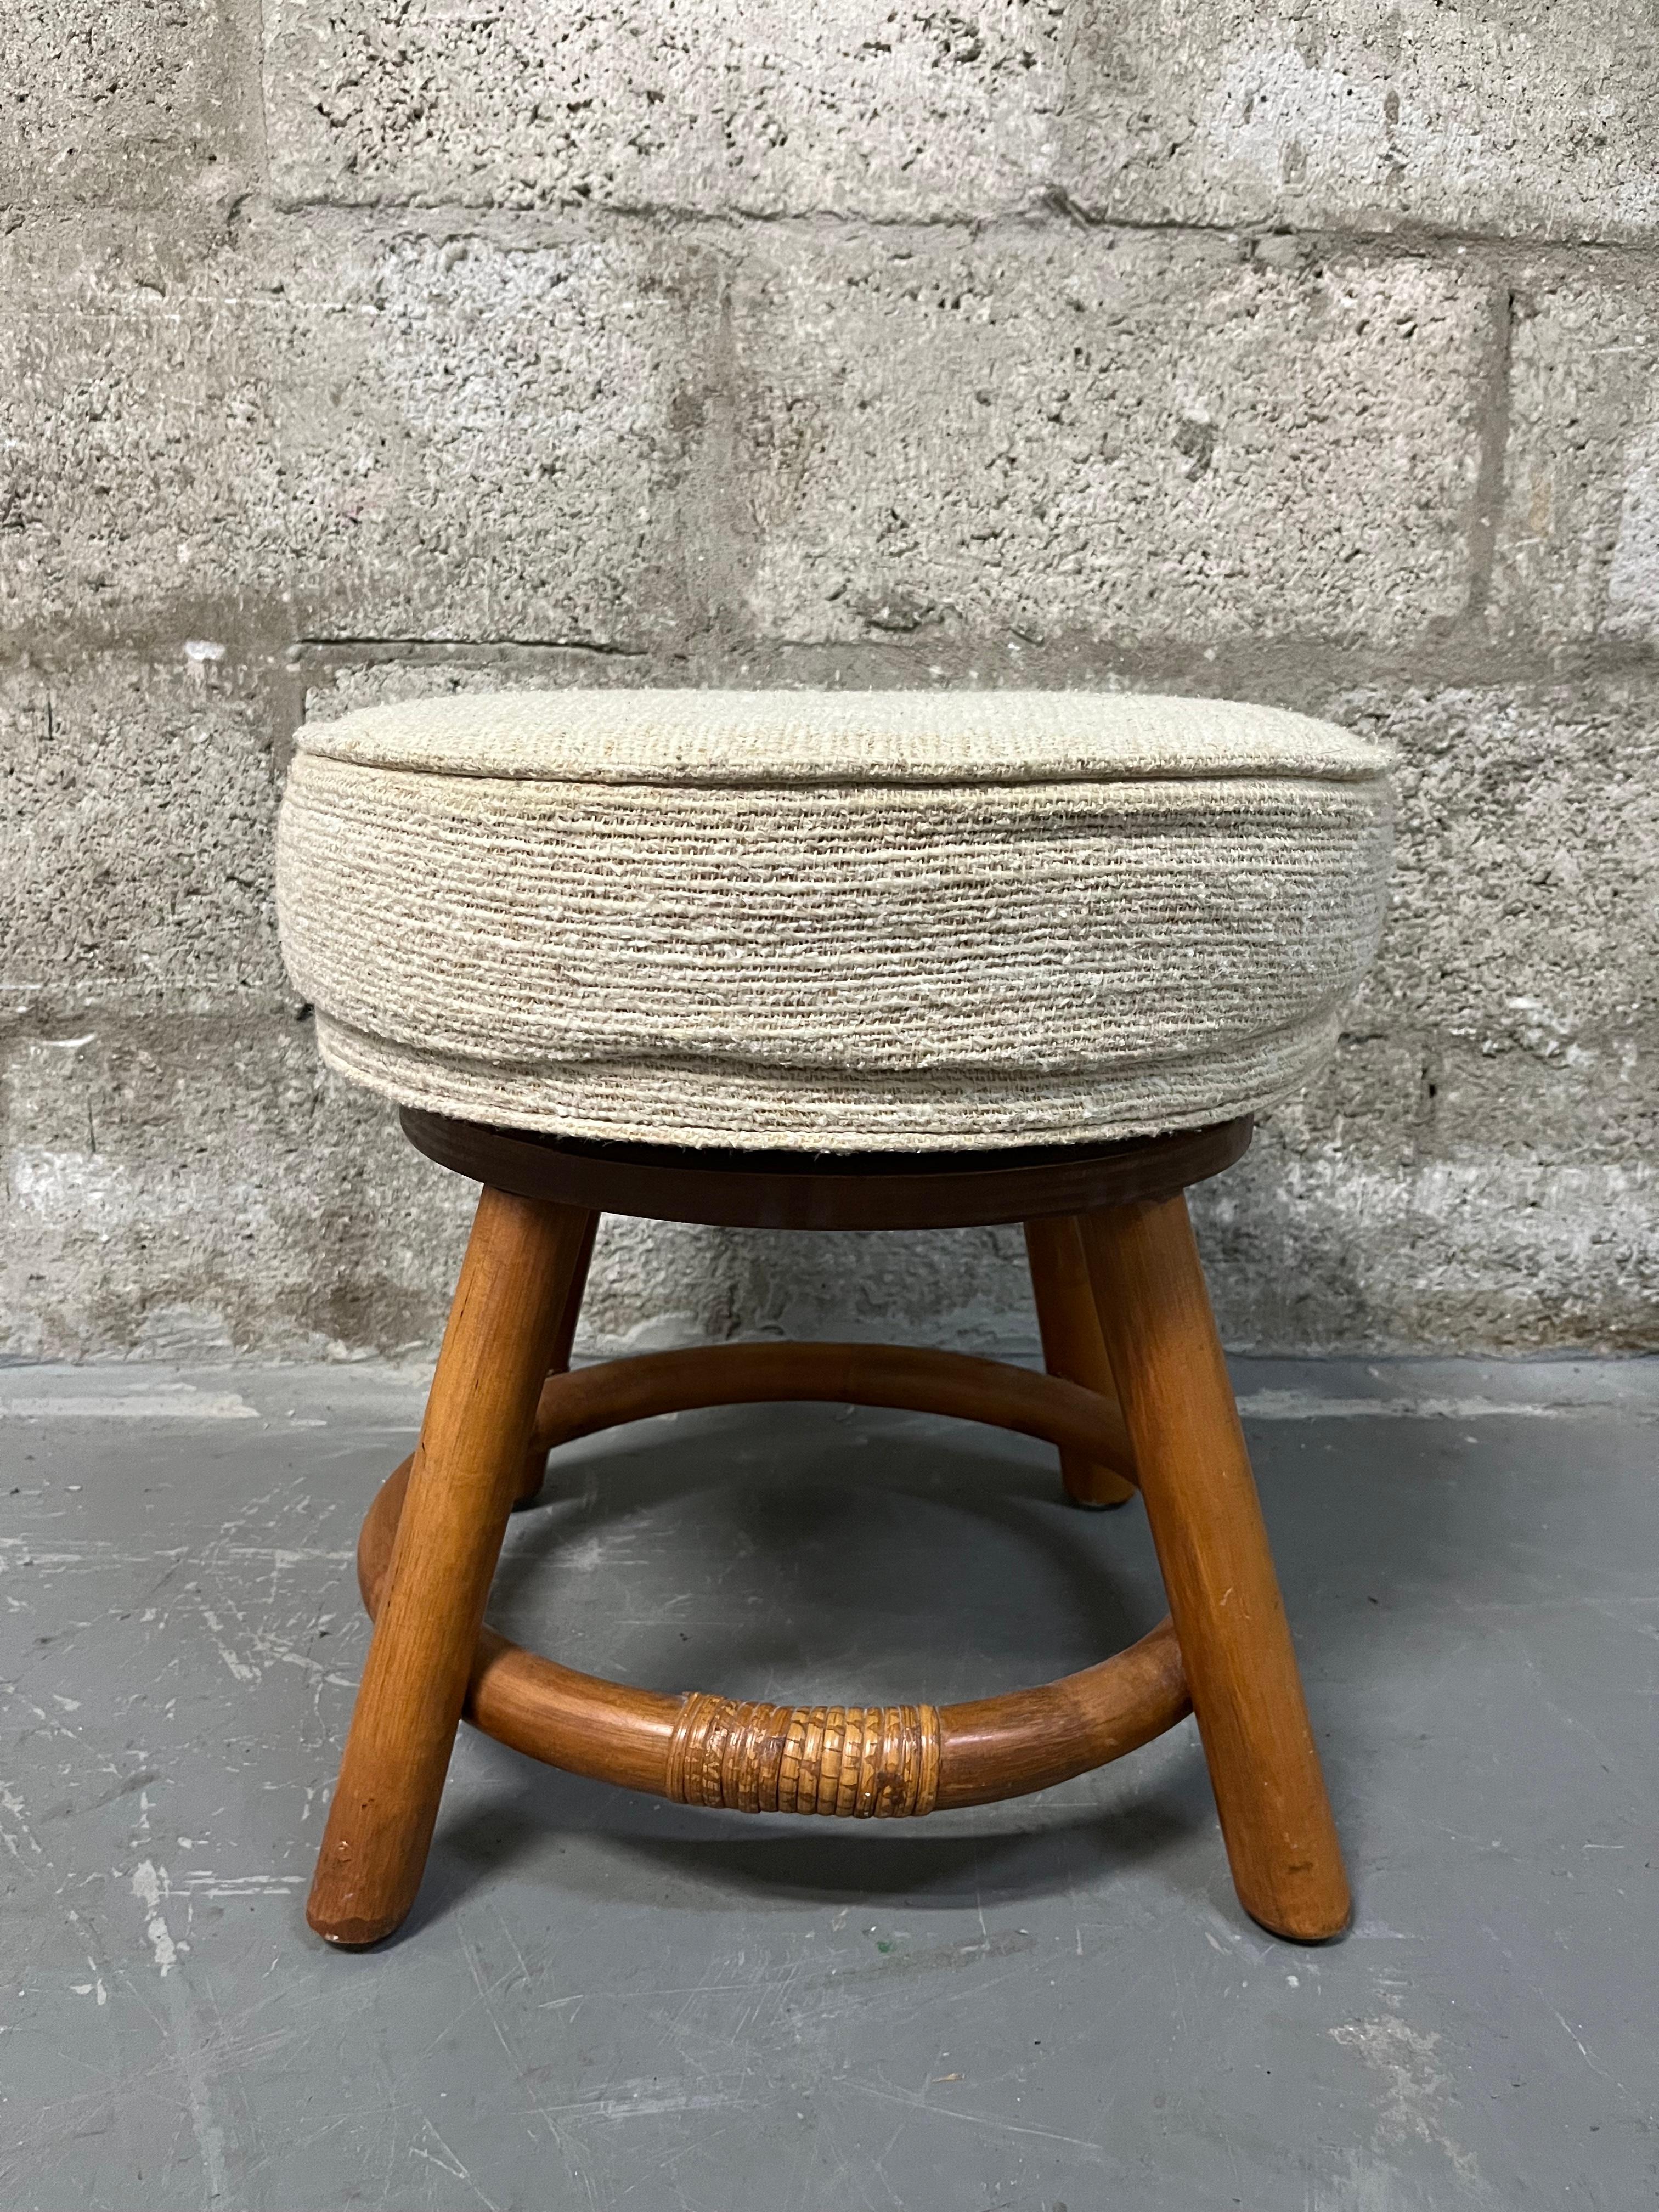 Bamboo Rattan Wicker Swivel Footstool in the Paul Frankl's Style. Circa 1970s  For Sale 4